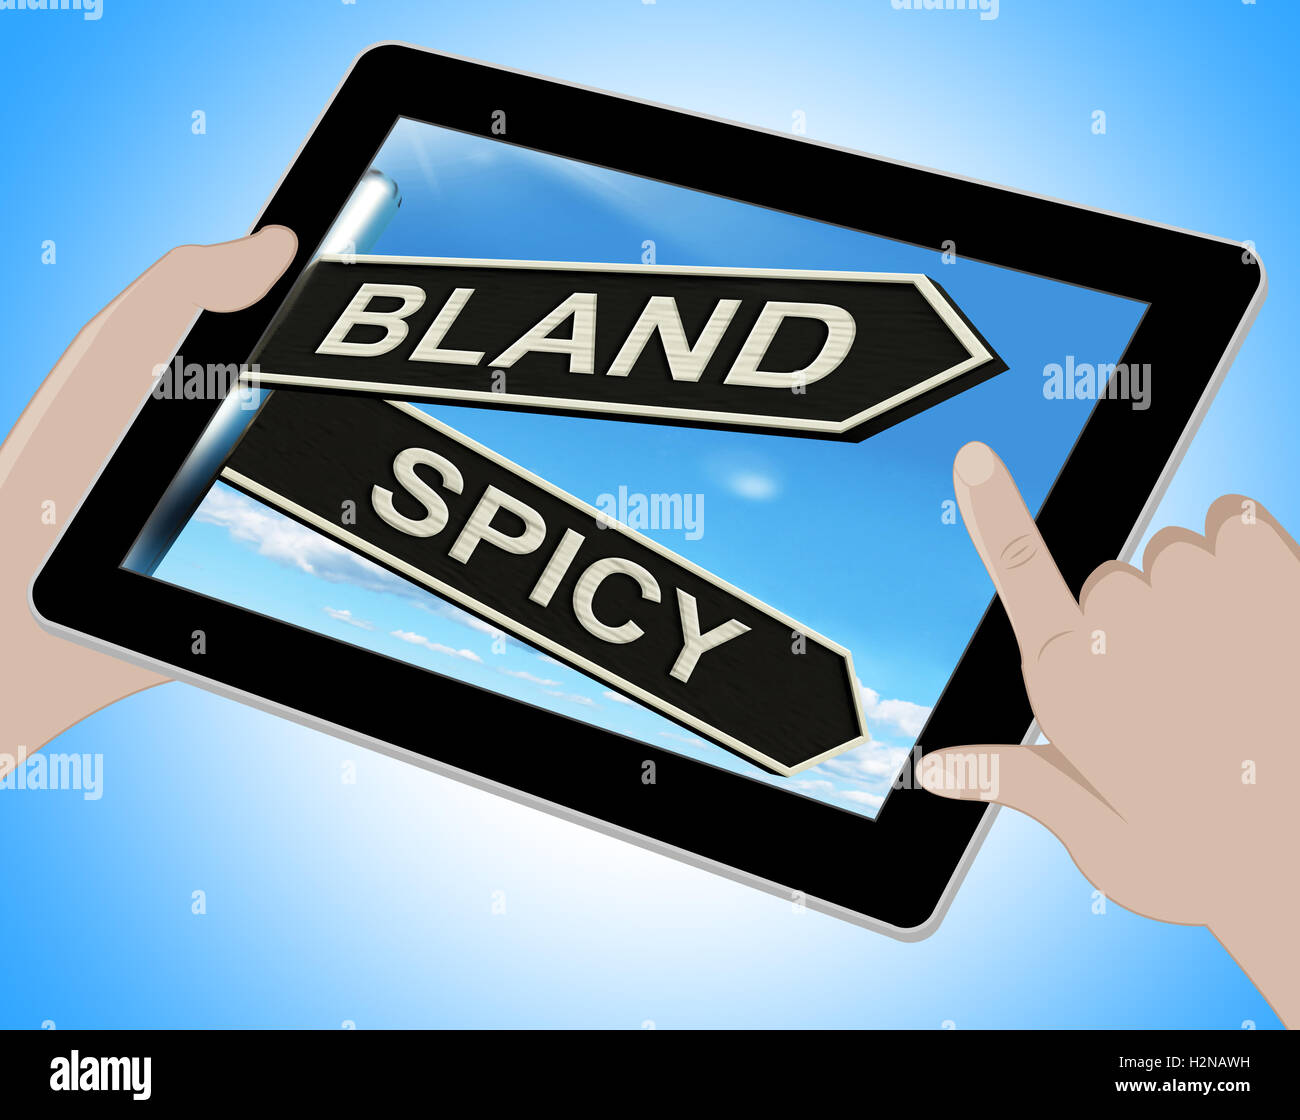 Bland Spicy Tablet Meaning Tasteless Or Hot Stock Photo